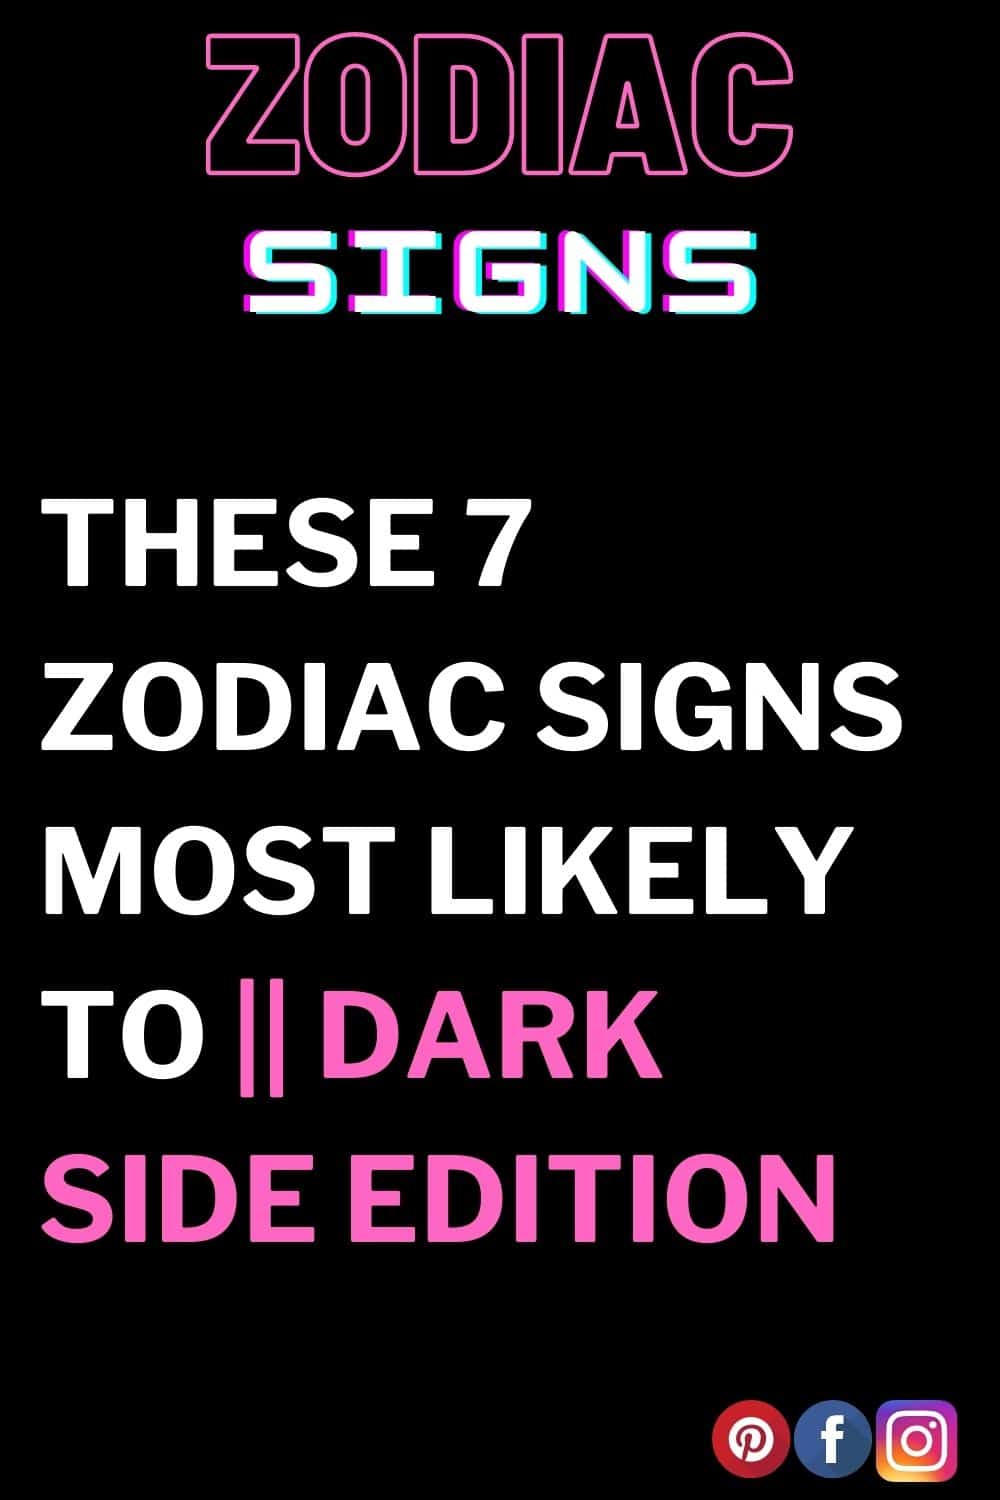 These 7 Zodiac Signs Most Likely to || Dark Side Edition